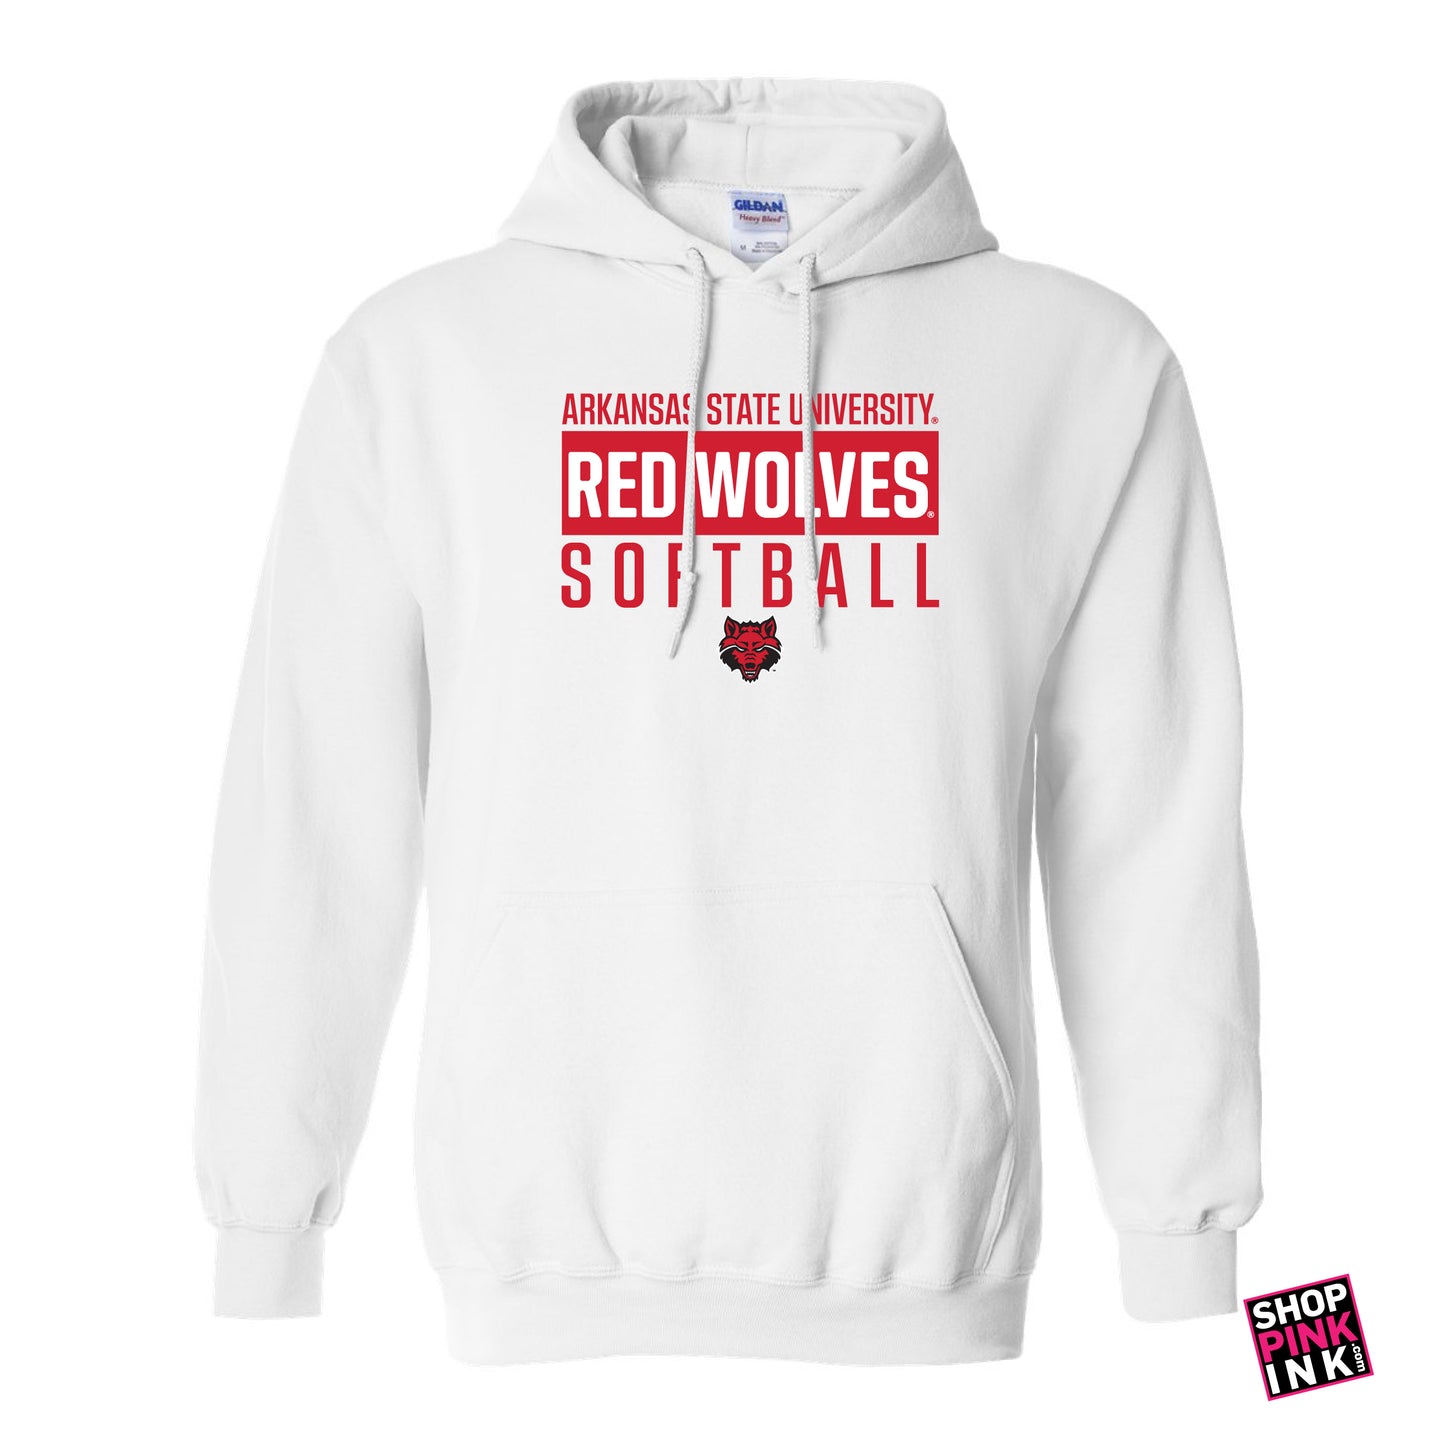 ASTATE Softball - Red Wolves Box - Hoody - 22900